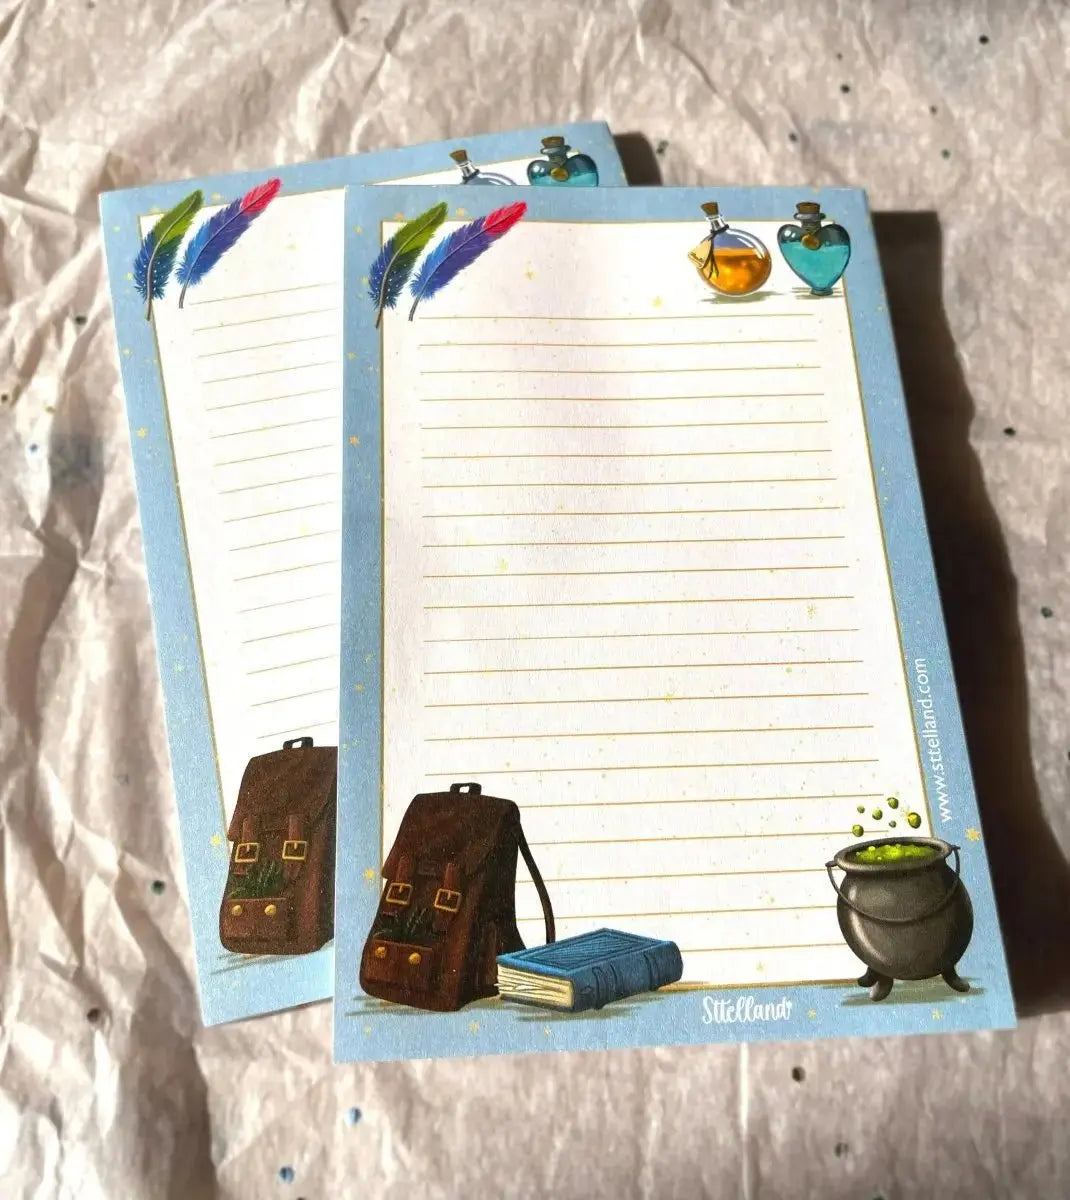 Cute Magic Memo notepads - scrapbooking - journaling - Printed Paper Notes, Stationery Gift Sttelland Boutique